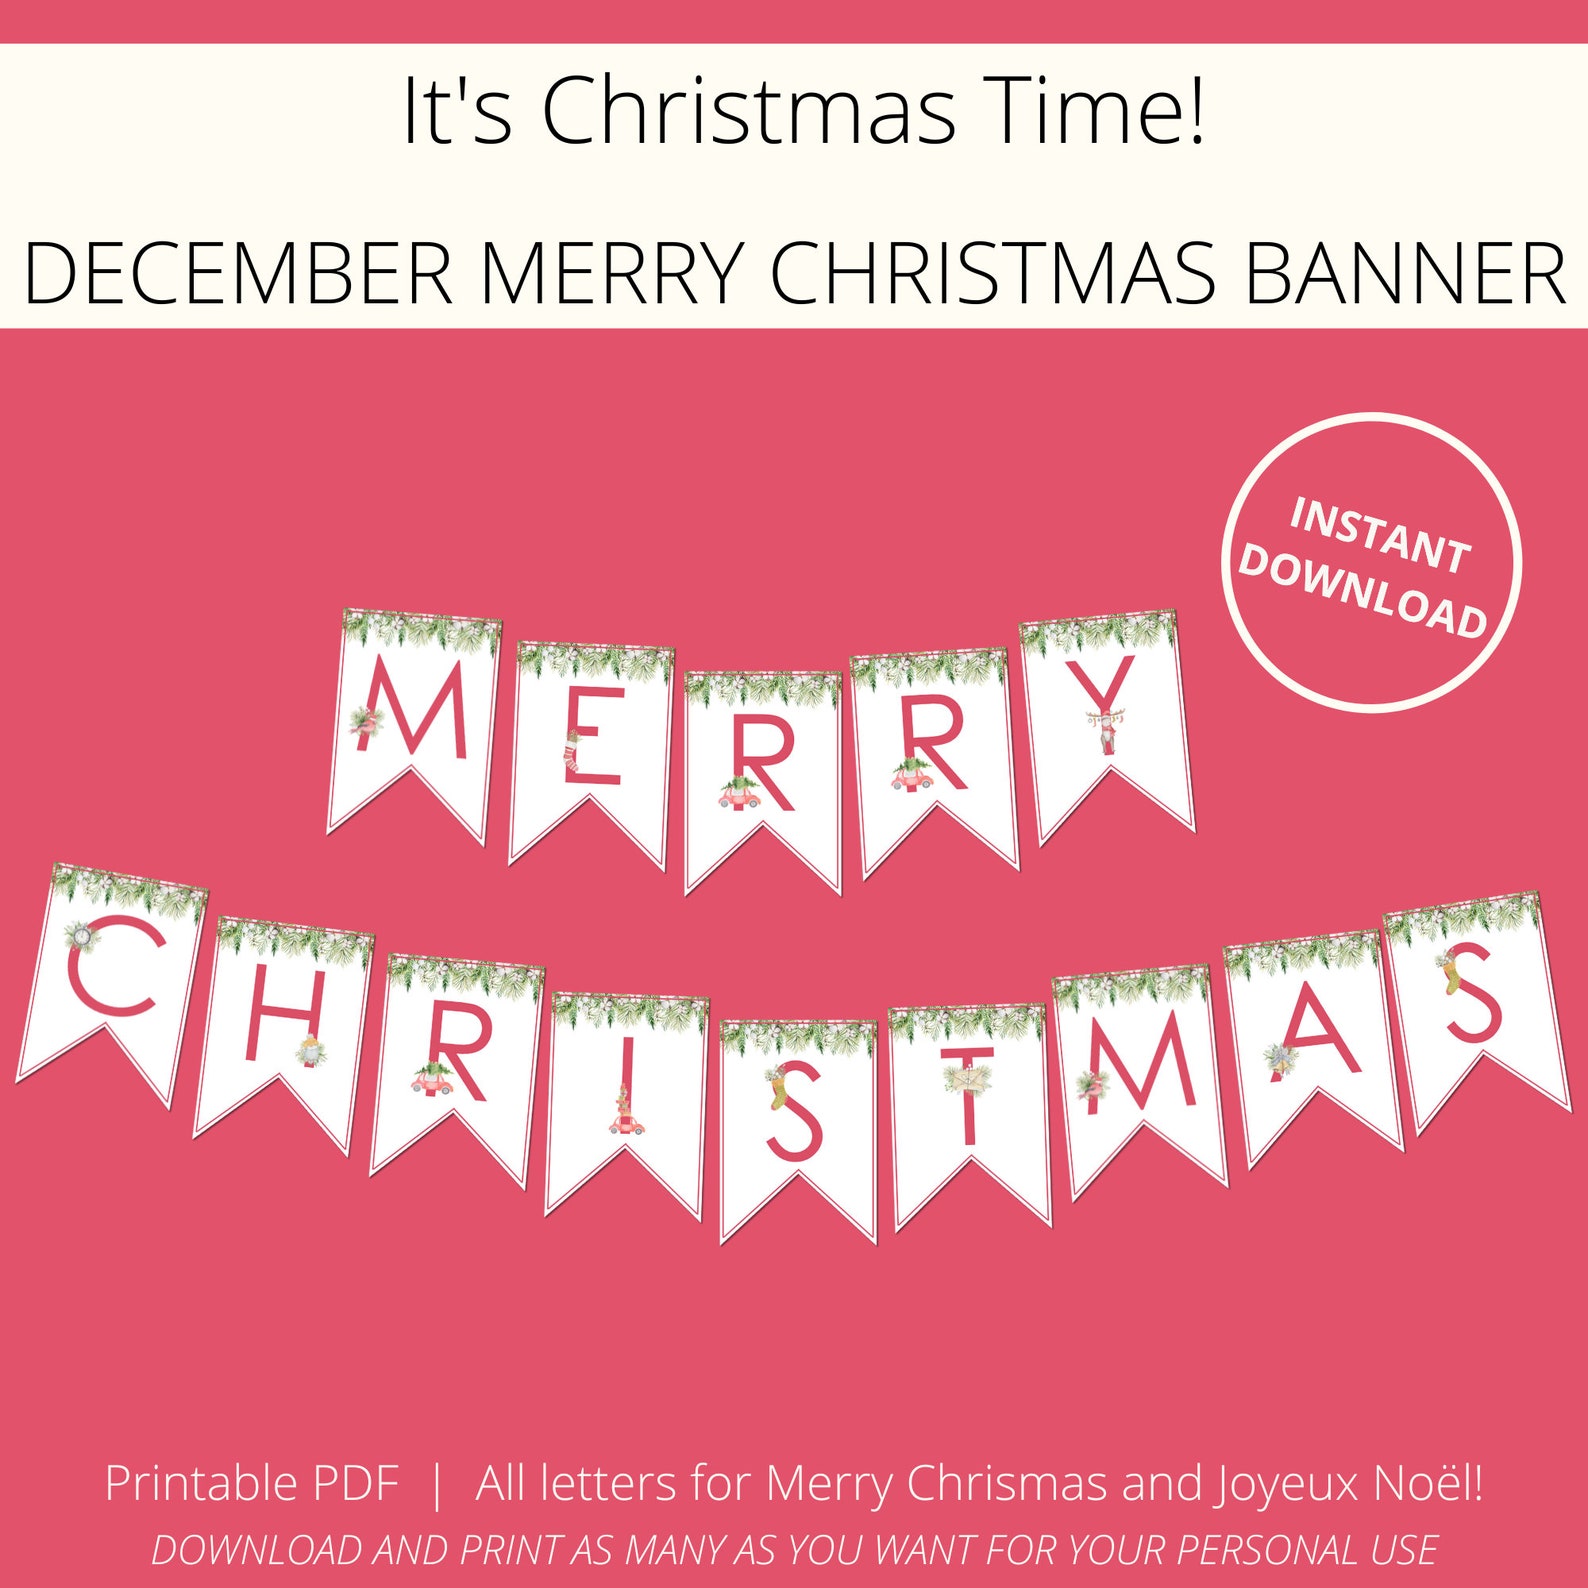 ms-word-merry-christmas-banner-template-word-excel-templates